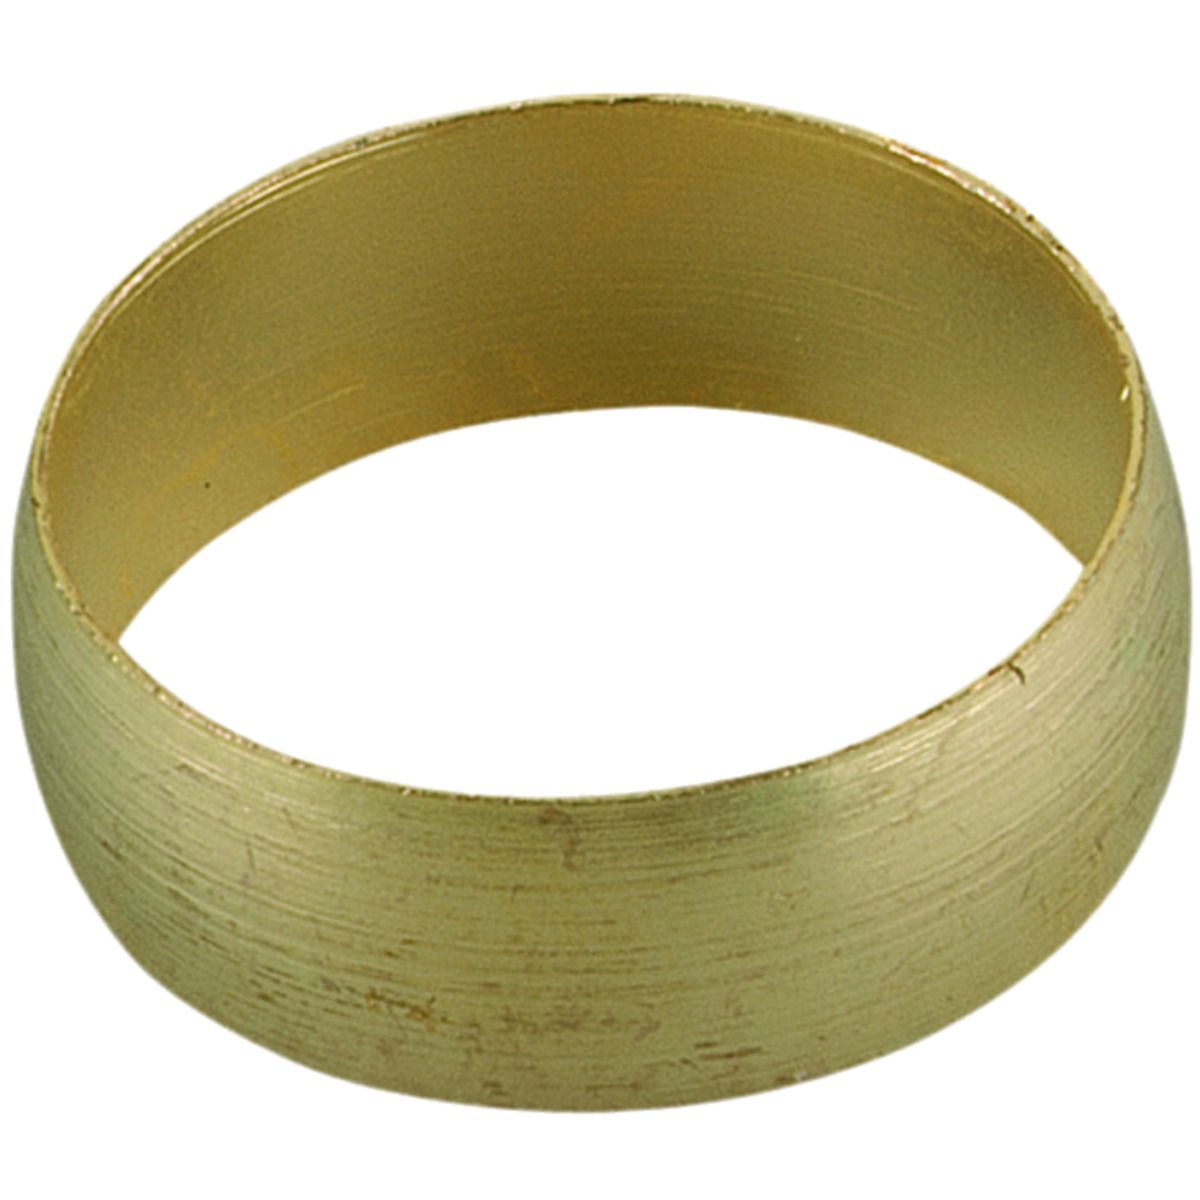 Image of Primaflow Brass Compression Olive Ring - 22mm Pack Of 5